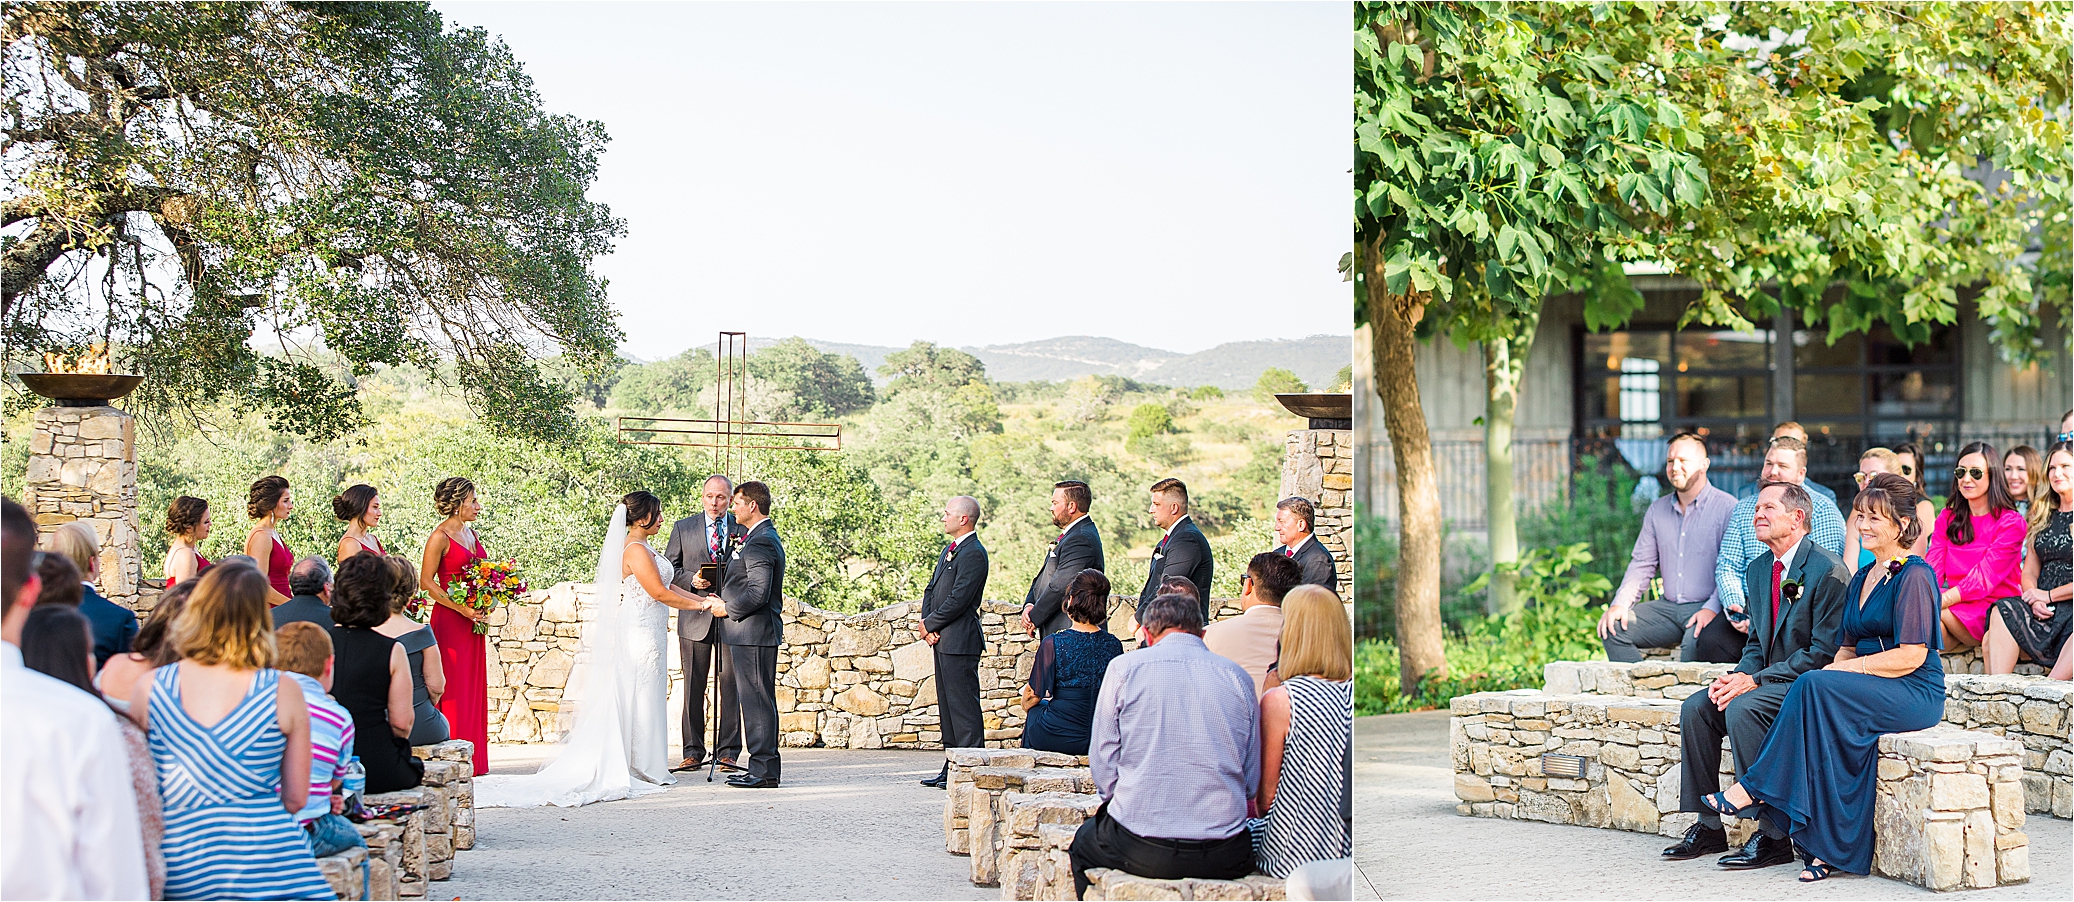 A wedding ceremony with views of the hill in Boerne, Texas at Paniolo Ranch